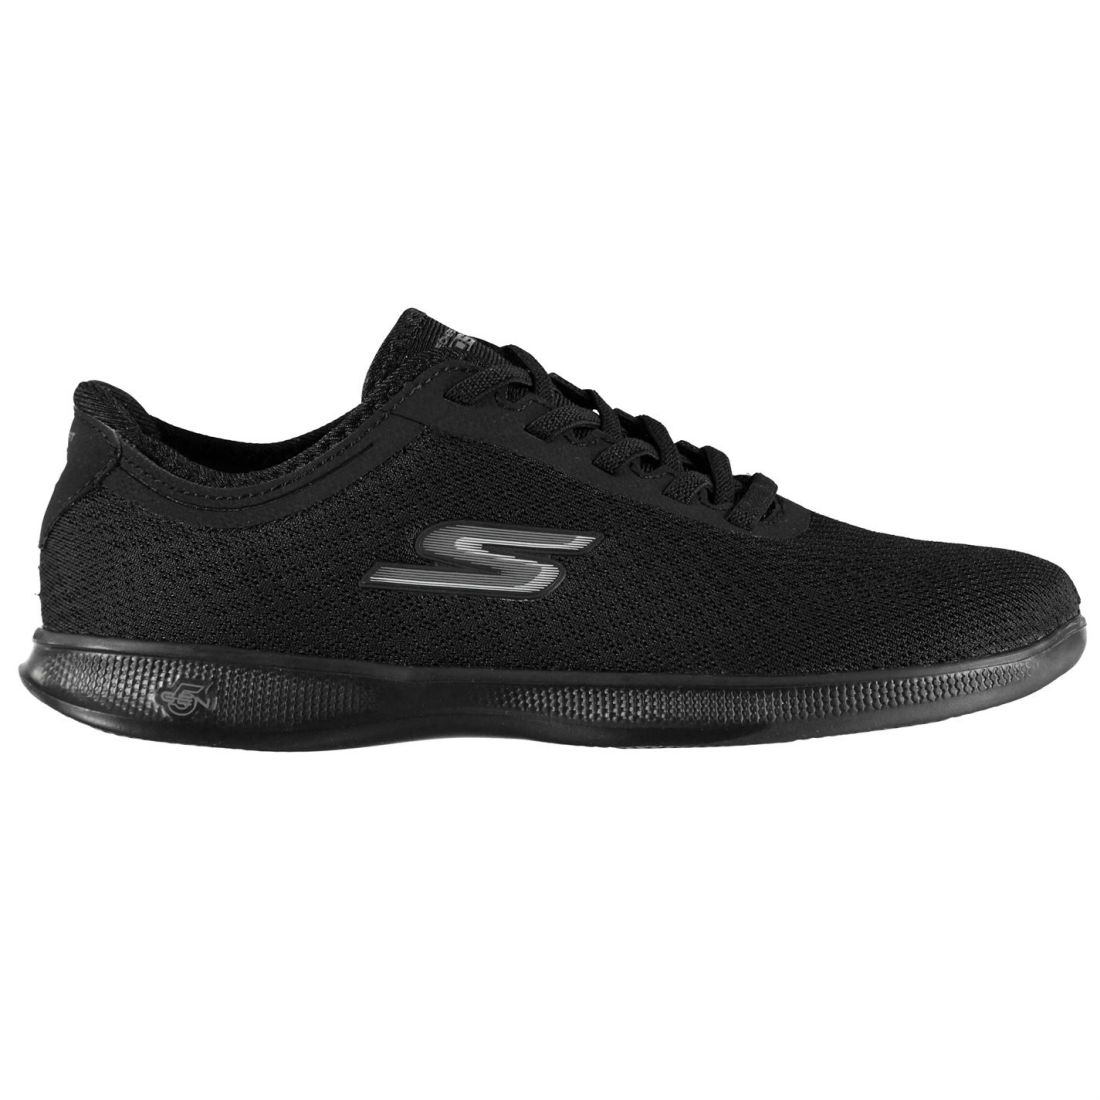 sports direct womens skechers trainers